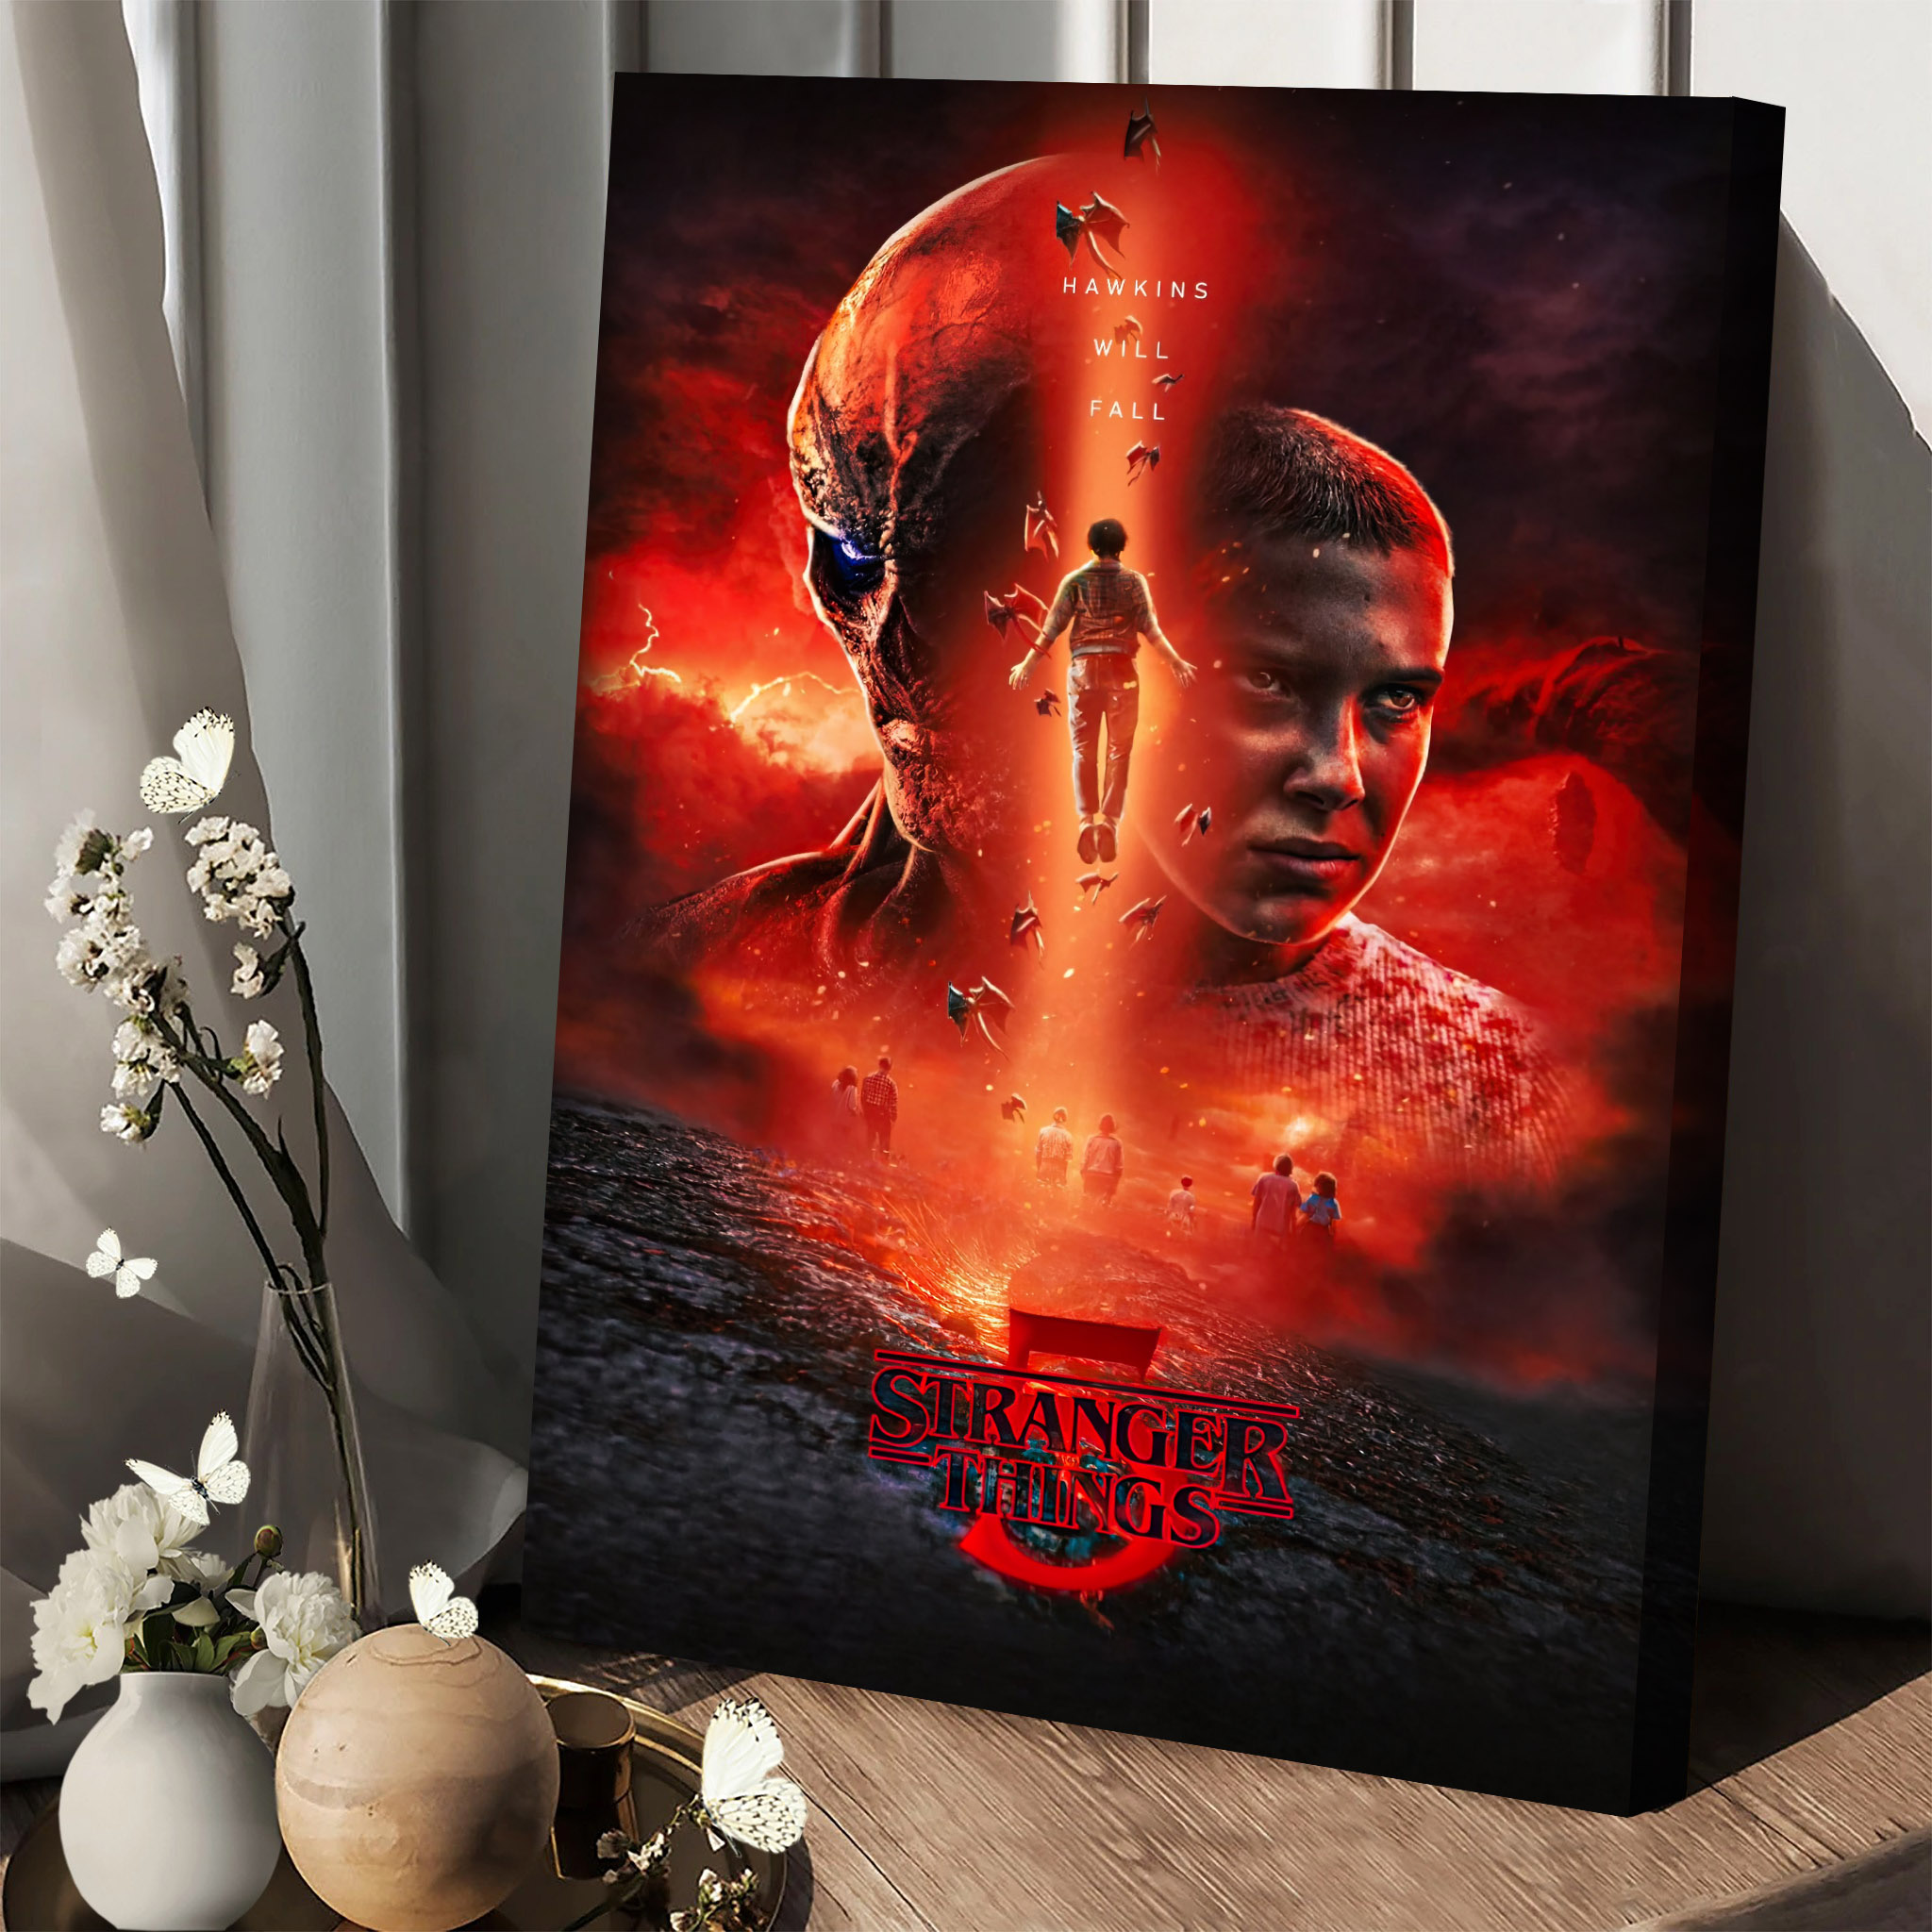 Stranger Things 5 The Final Season Hawkins Will Fall Home Decor Poster  Canvas - REVER LAVIE